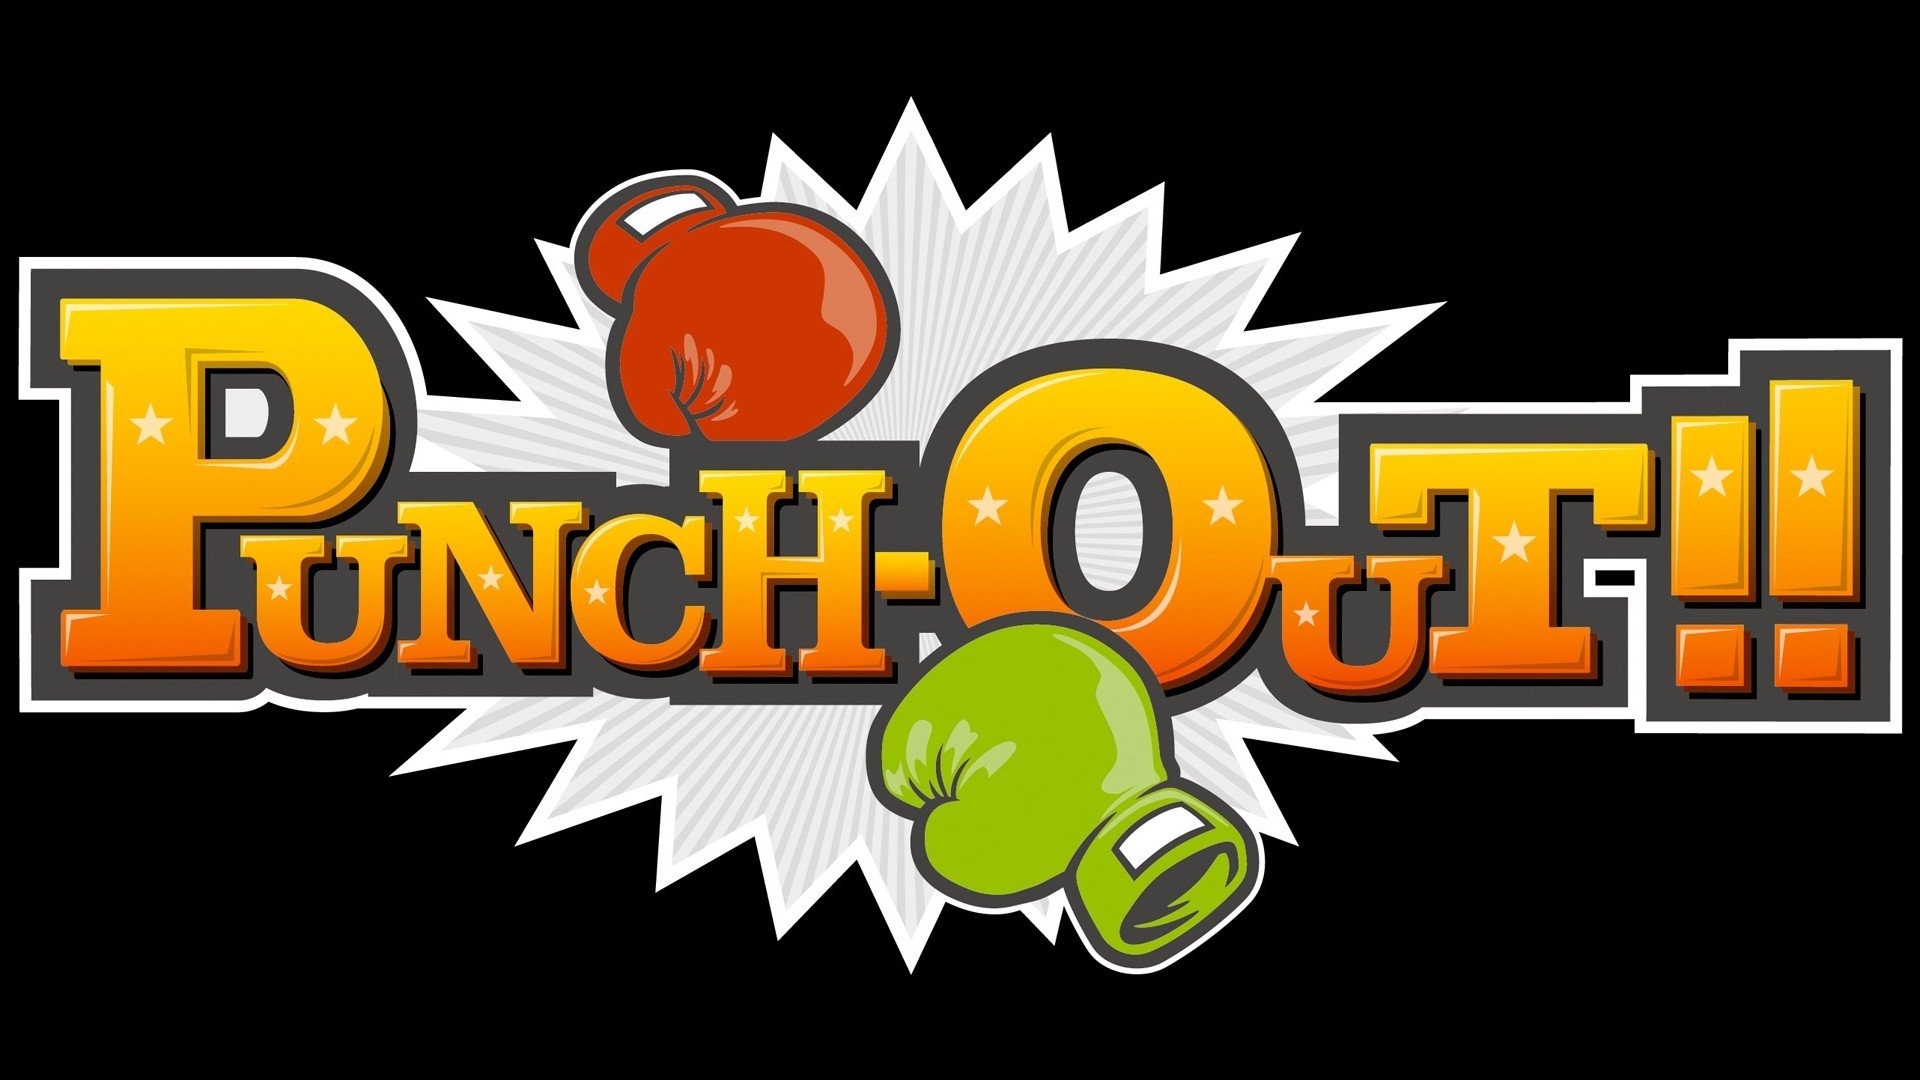 Best Punch-Out!! wallpaper ID:74175 for High Resolution full hd 1080p desktop